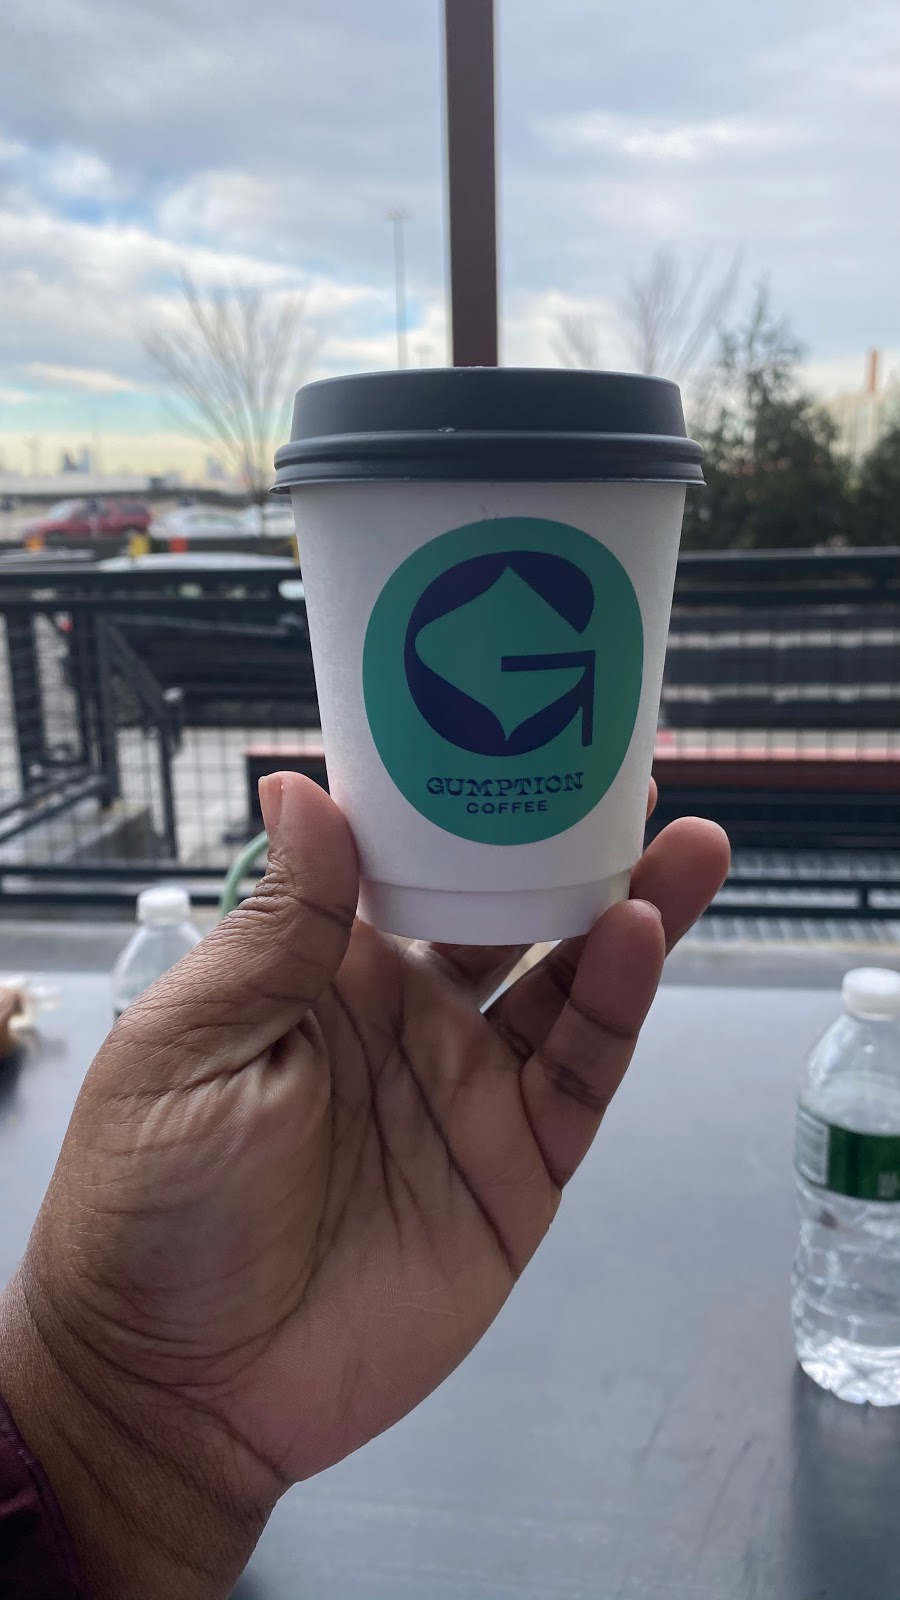 Gumption Coffee - cafe  | Photo 5 of 10 | Address: 168 39th St, Brooklyn, NY 11232, USA | Phone: (929) 232-1266